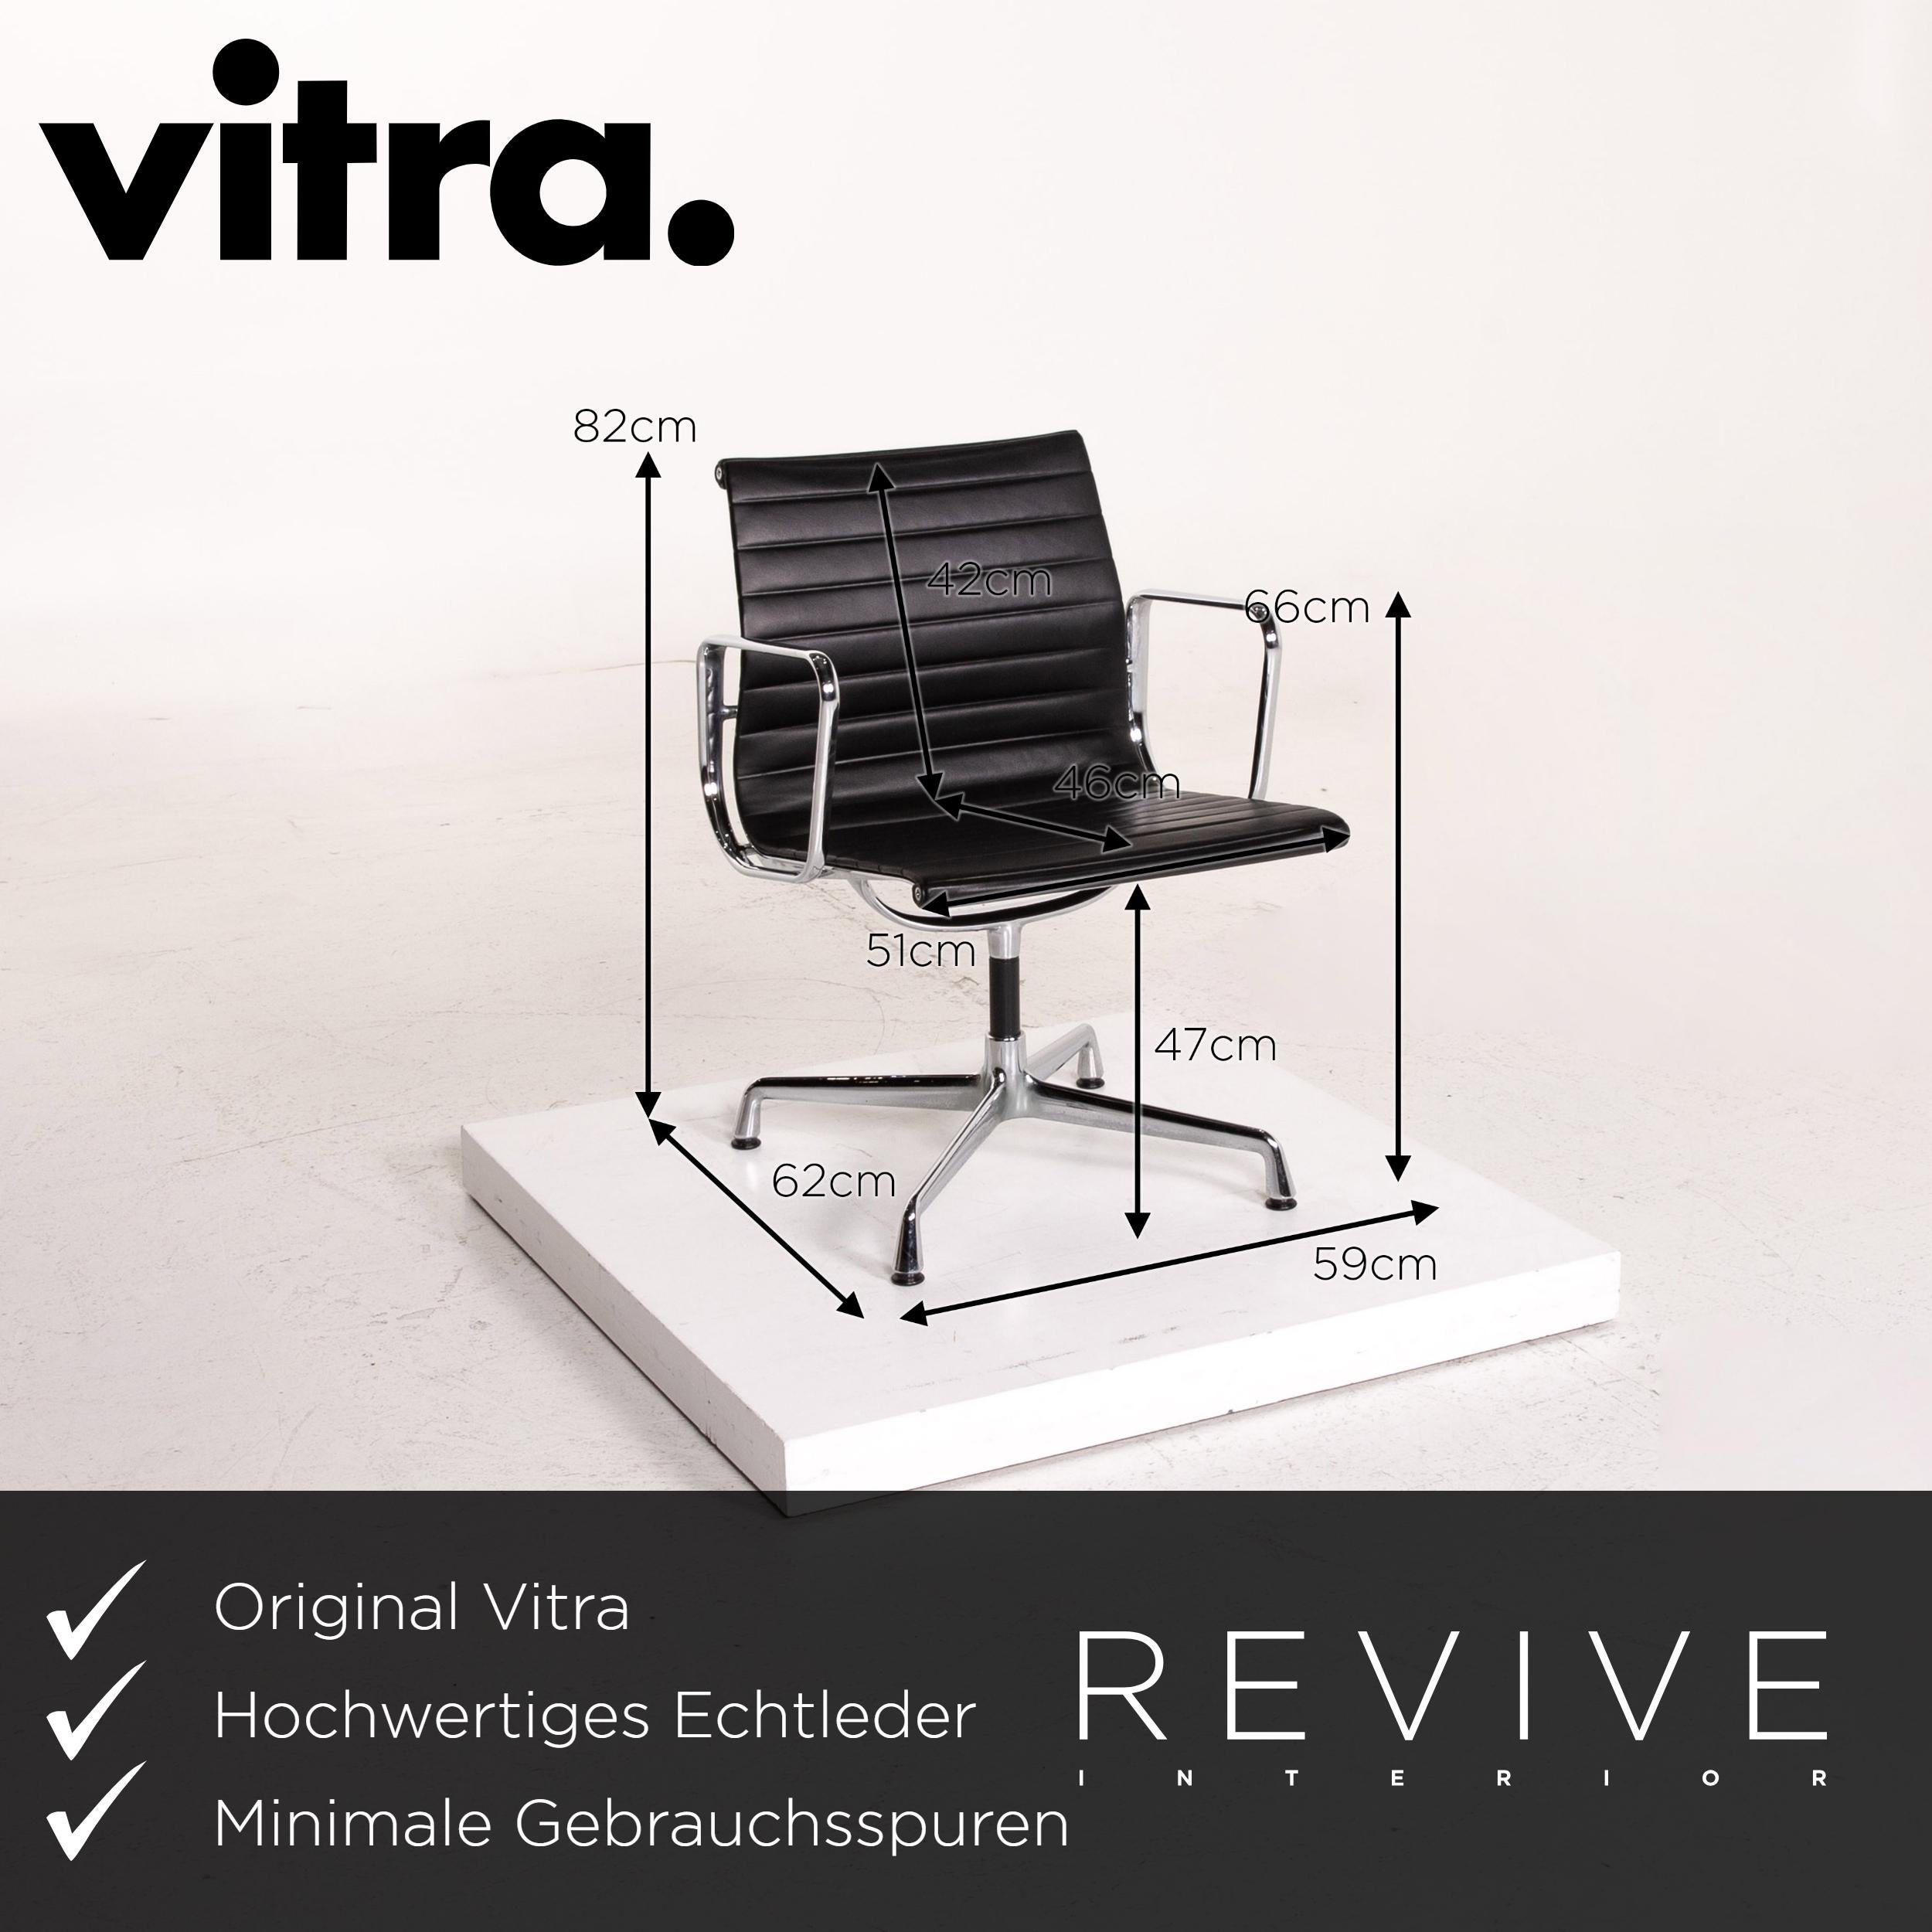 We present to you a Vitra EA 107 leather aluminum chair set dark brown 2x armchairs.
   
 

 Product measurements in centimeters:
 

Depth 62
Width 59
Height 82
Seat height 47
Rest height 66
Seat depth 46
Seat width 51
Back height 42.